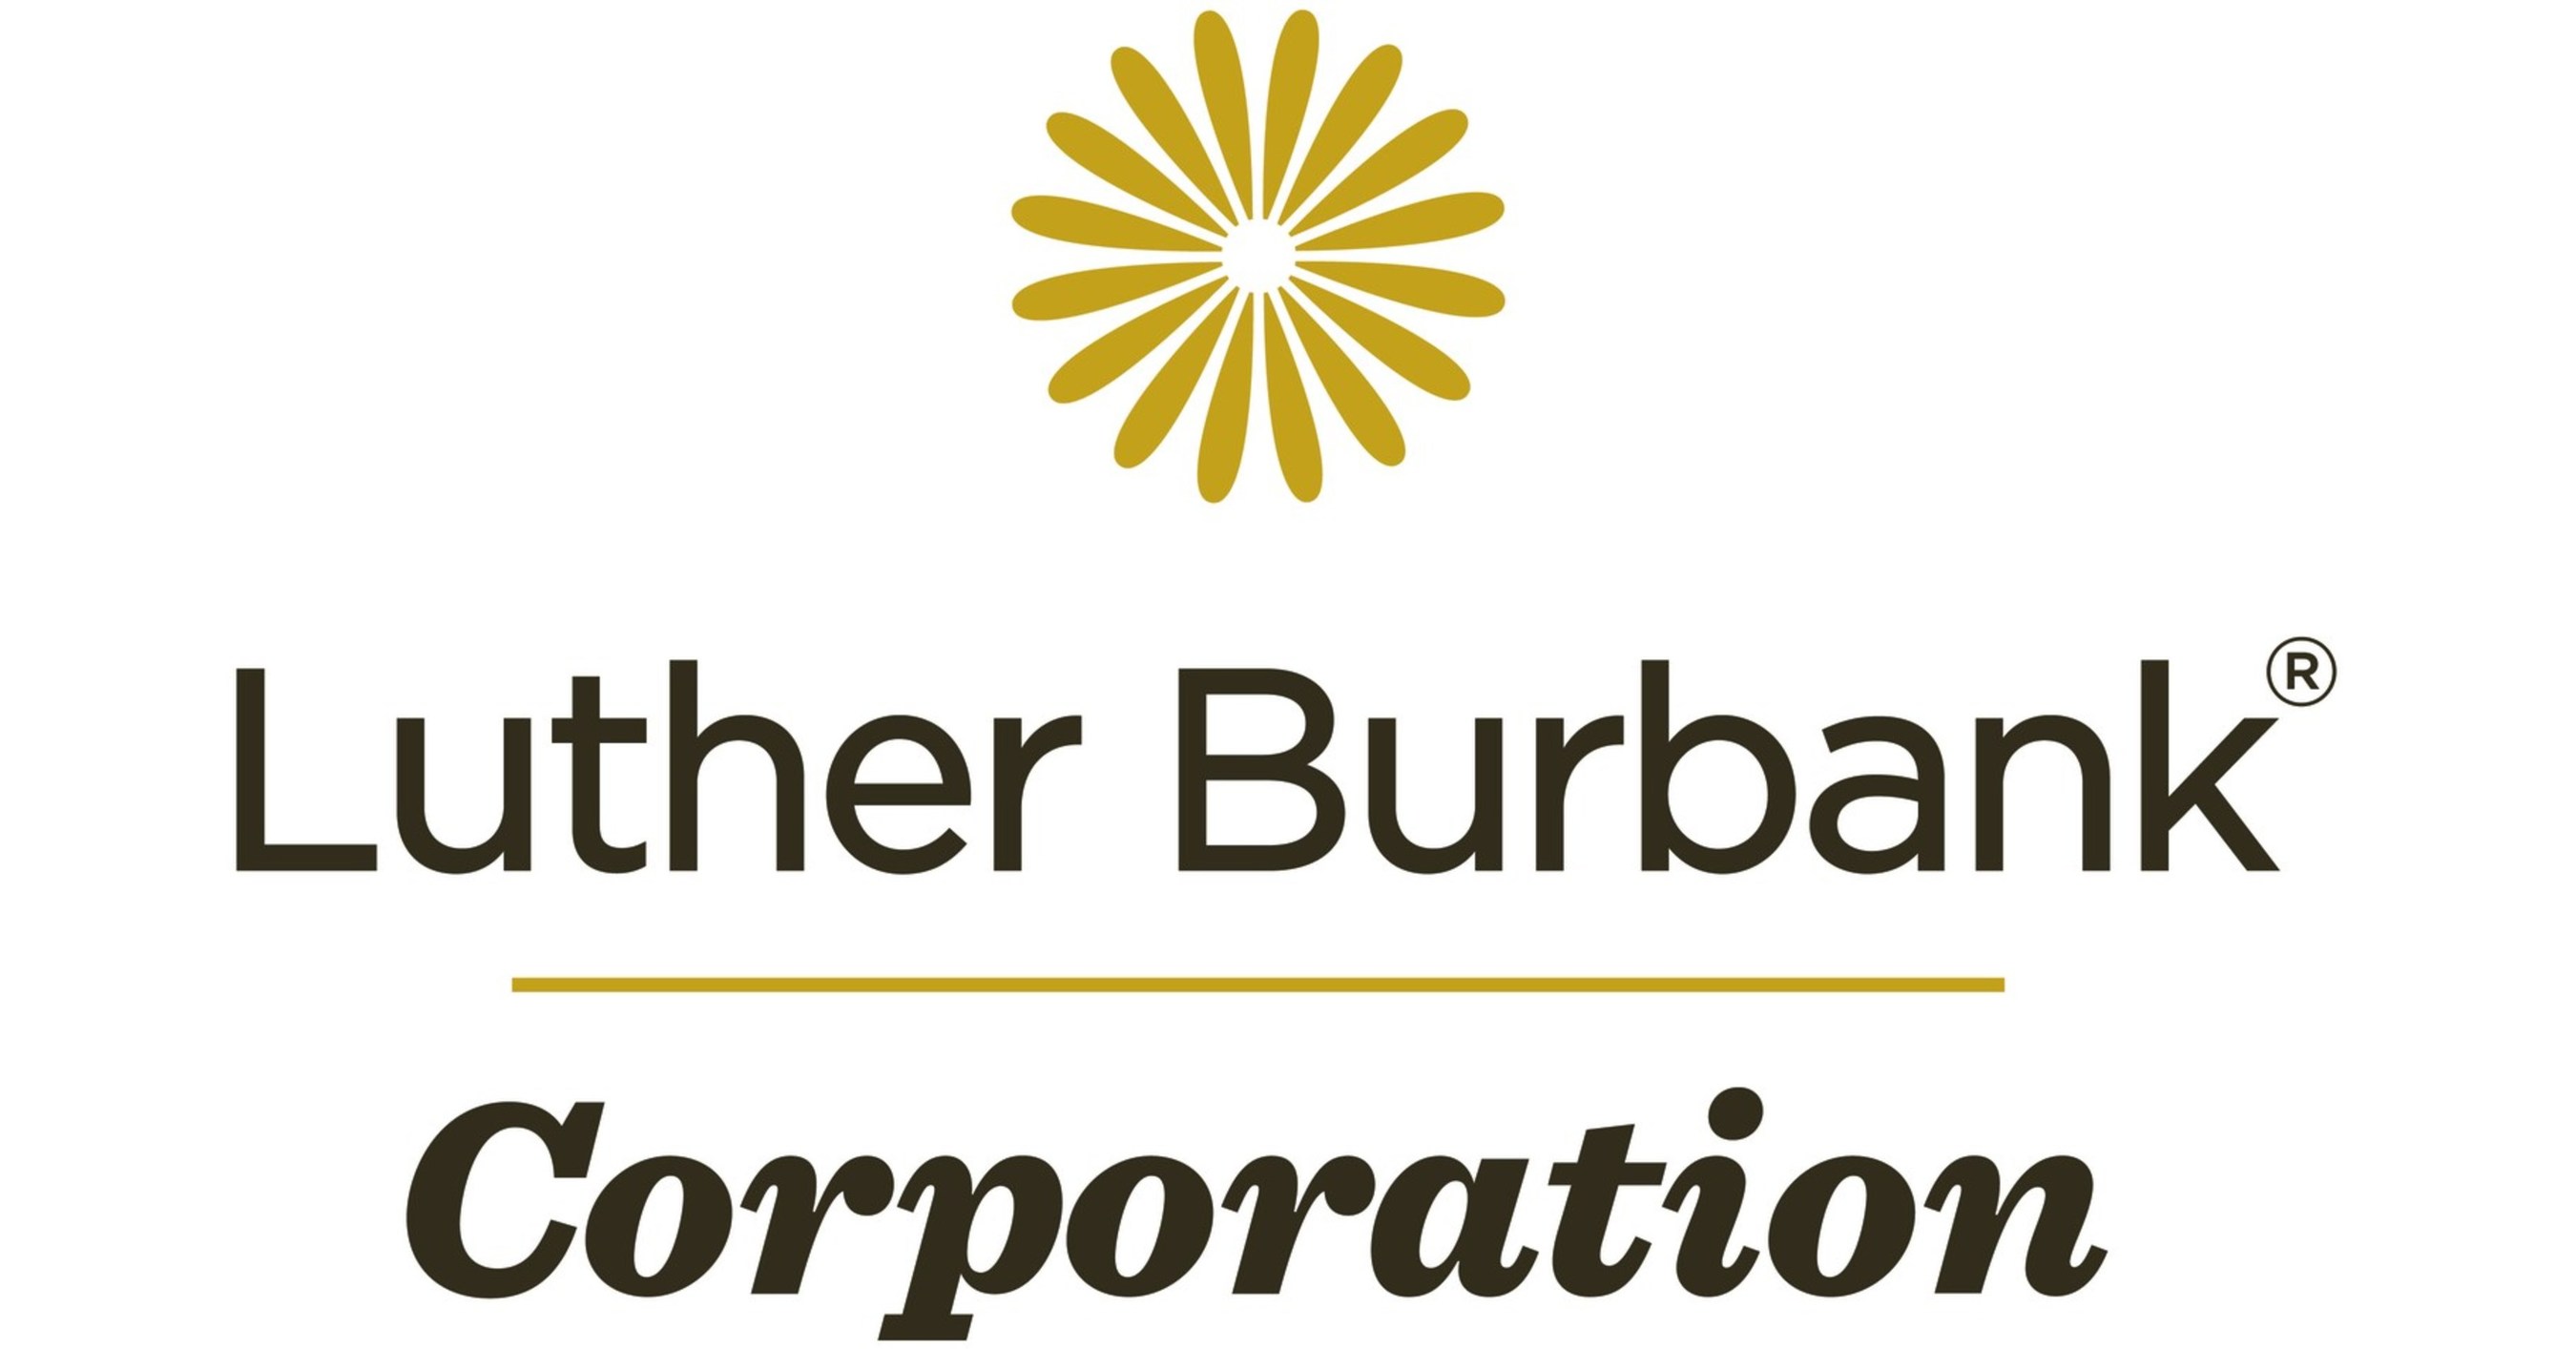 Luther Burbank Corporation